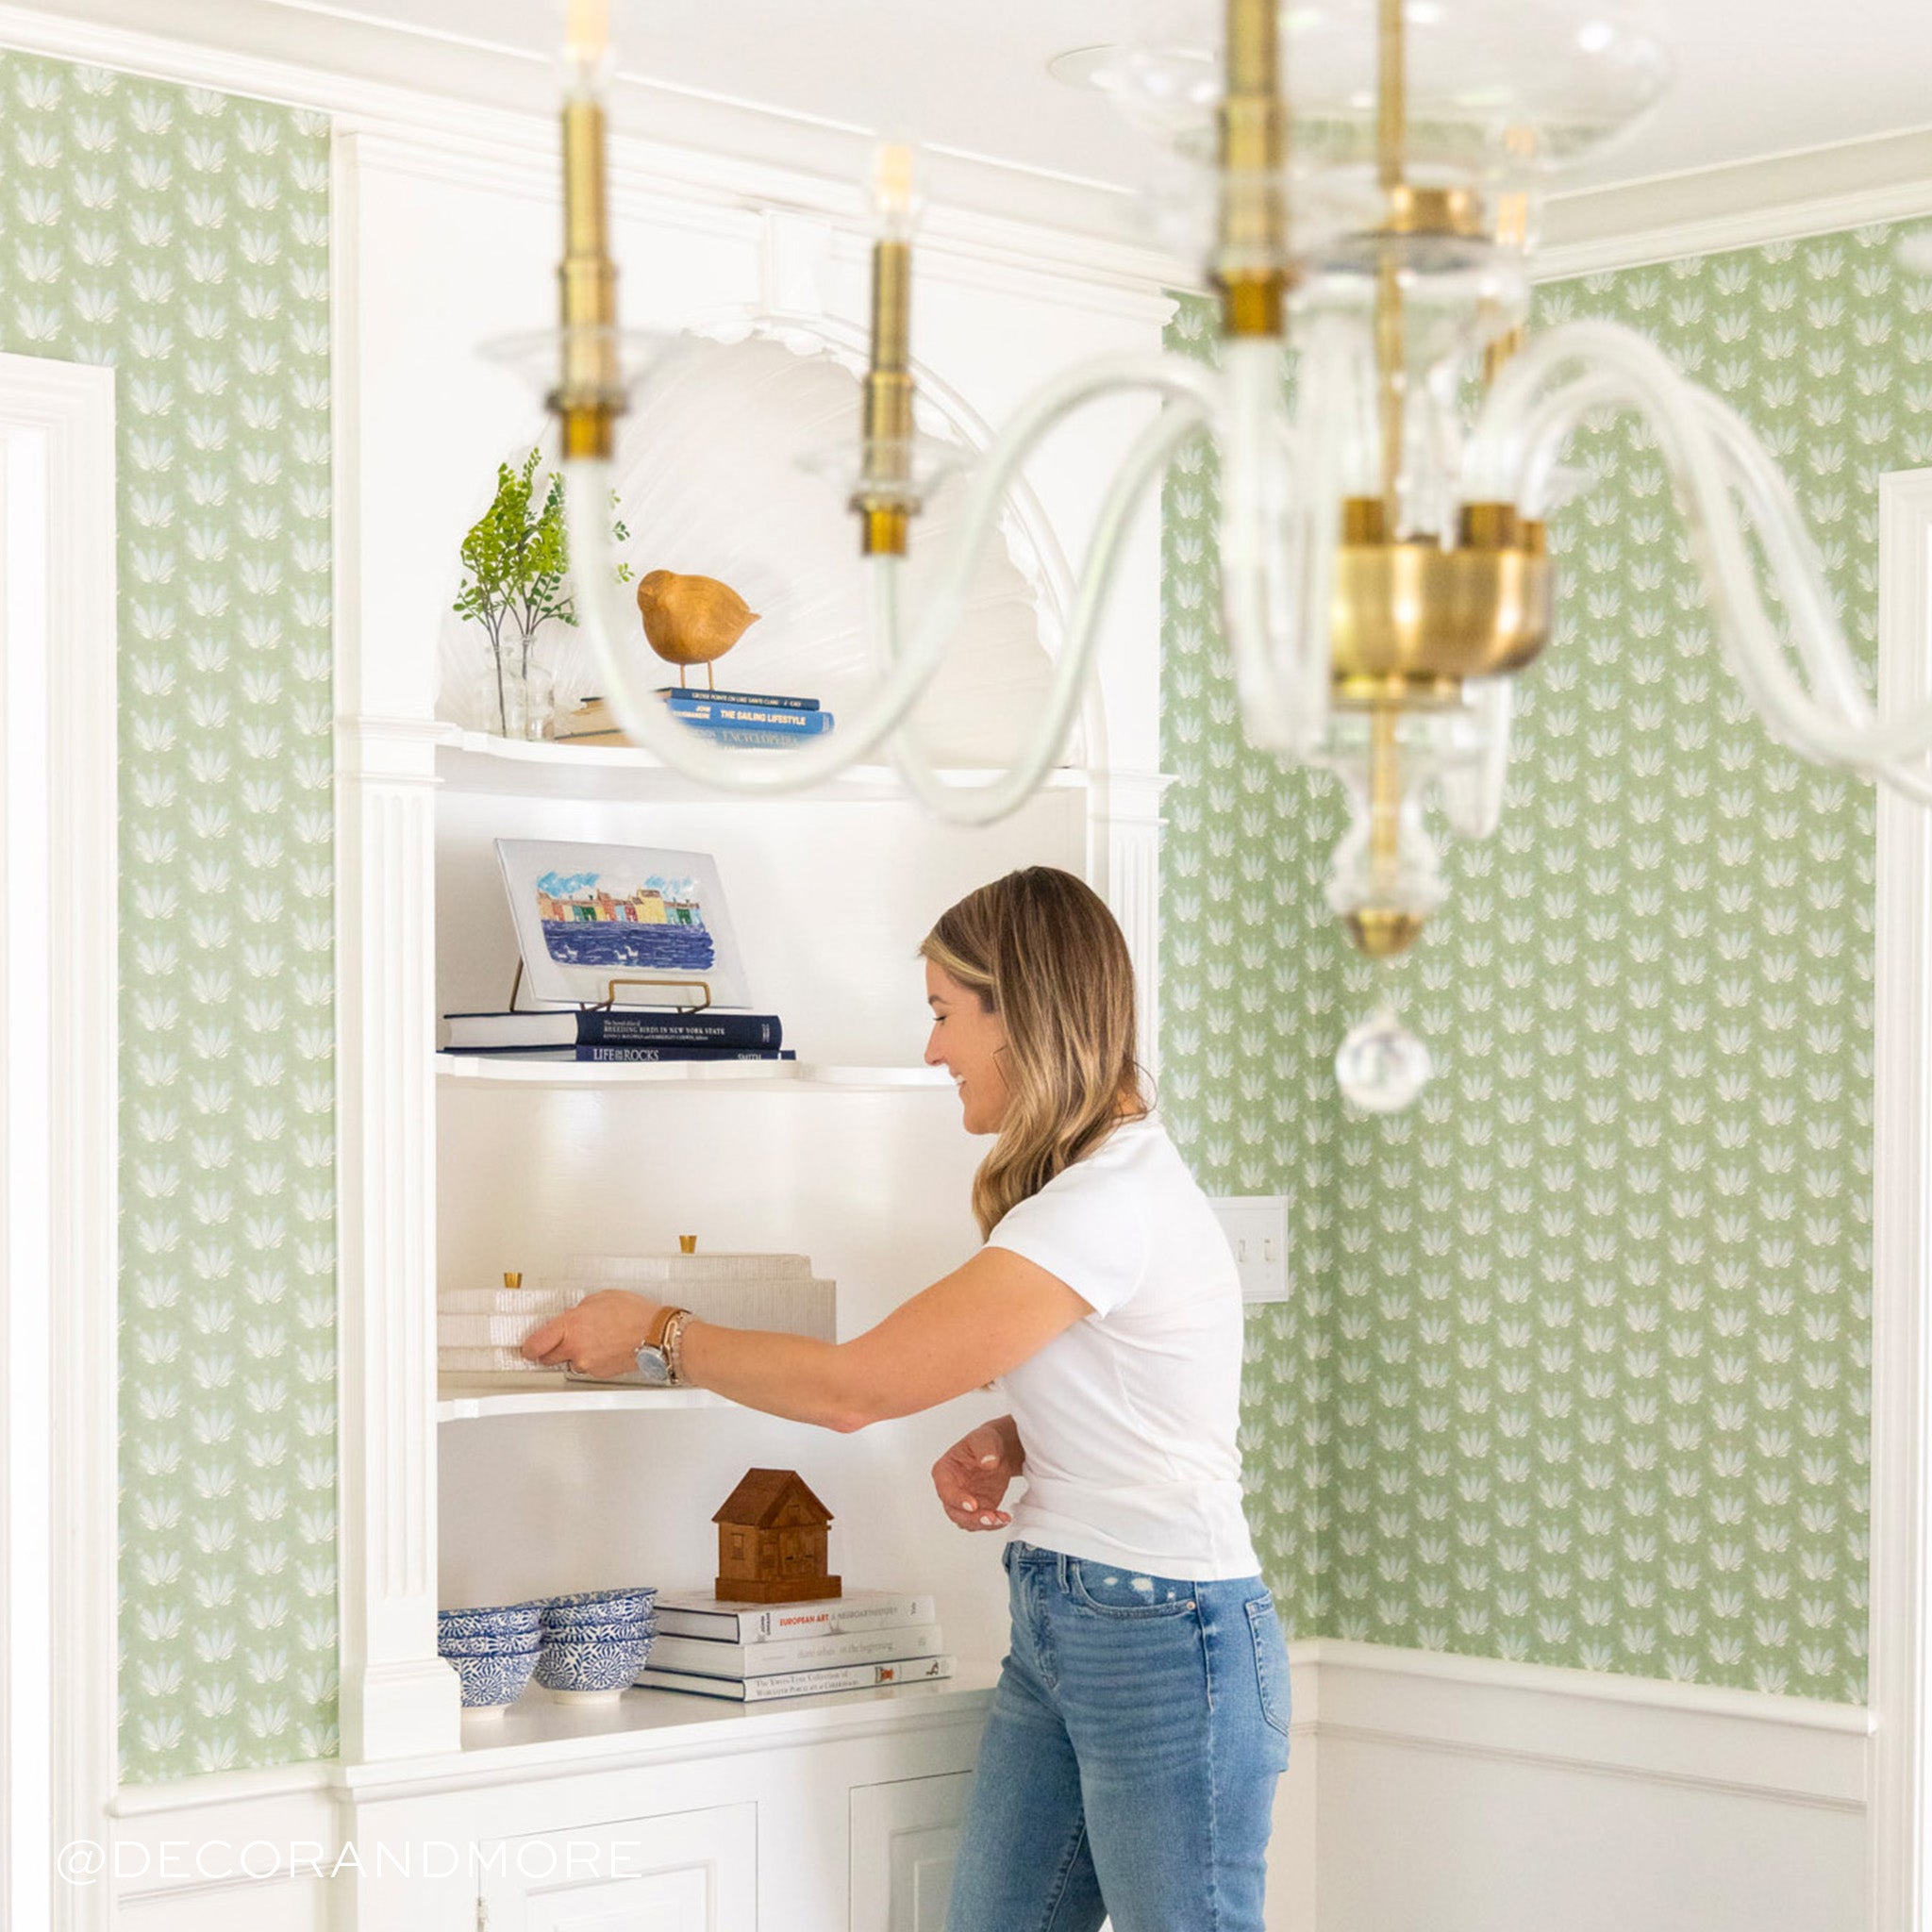 Dining room corner close-up styled with a Blue & Green Floral Drop Repeat Printed Wallpaper and white shelves with plates and decorations being held by blonde woman wearing white t-shirt and jeans